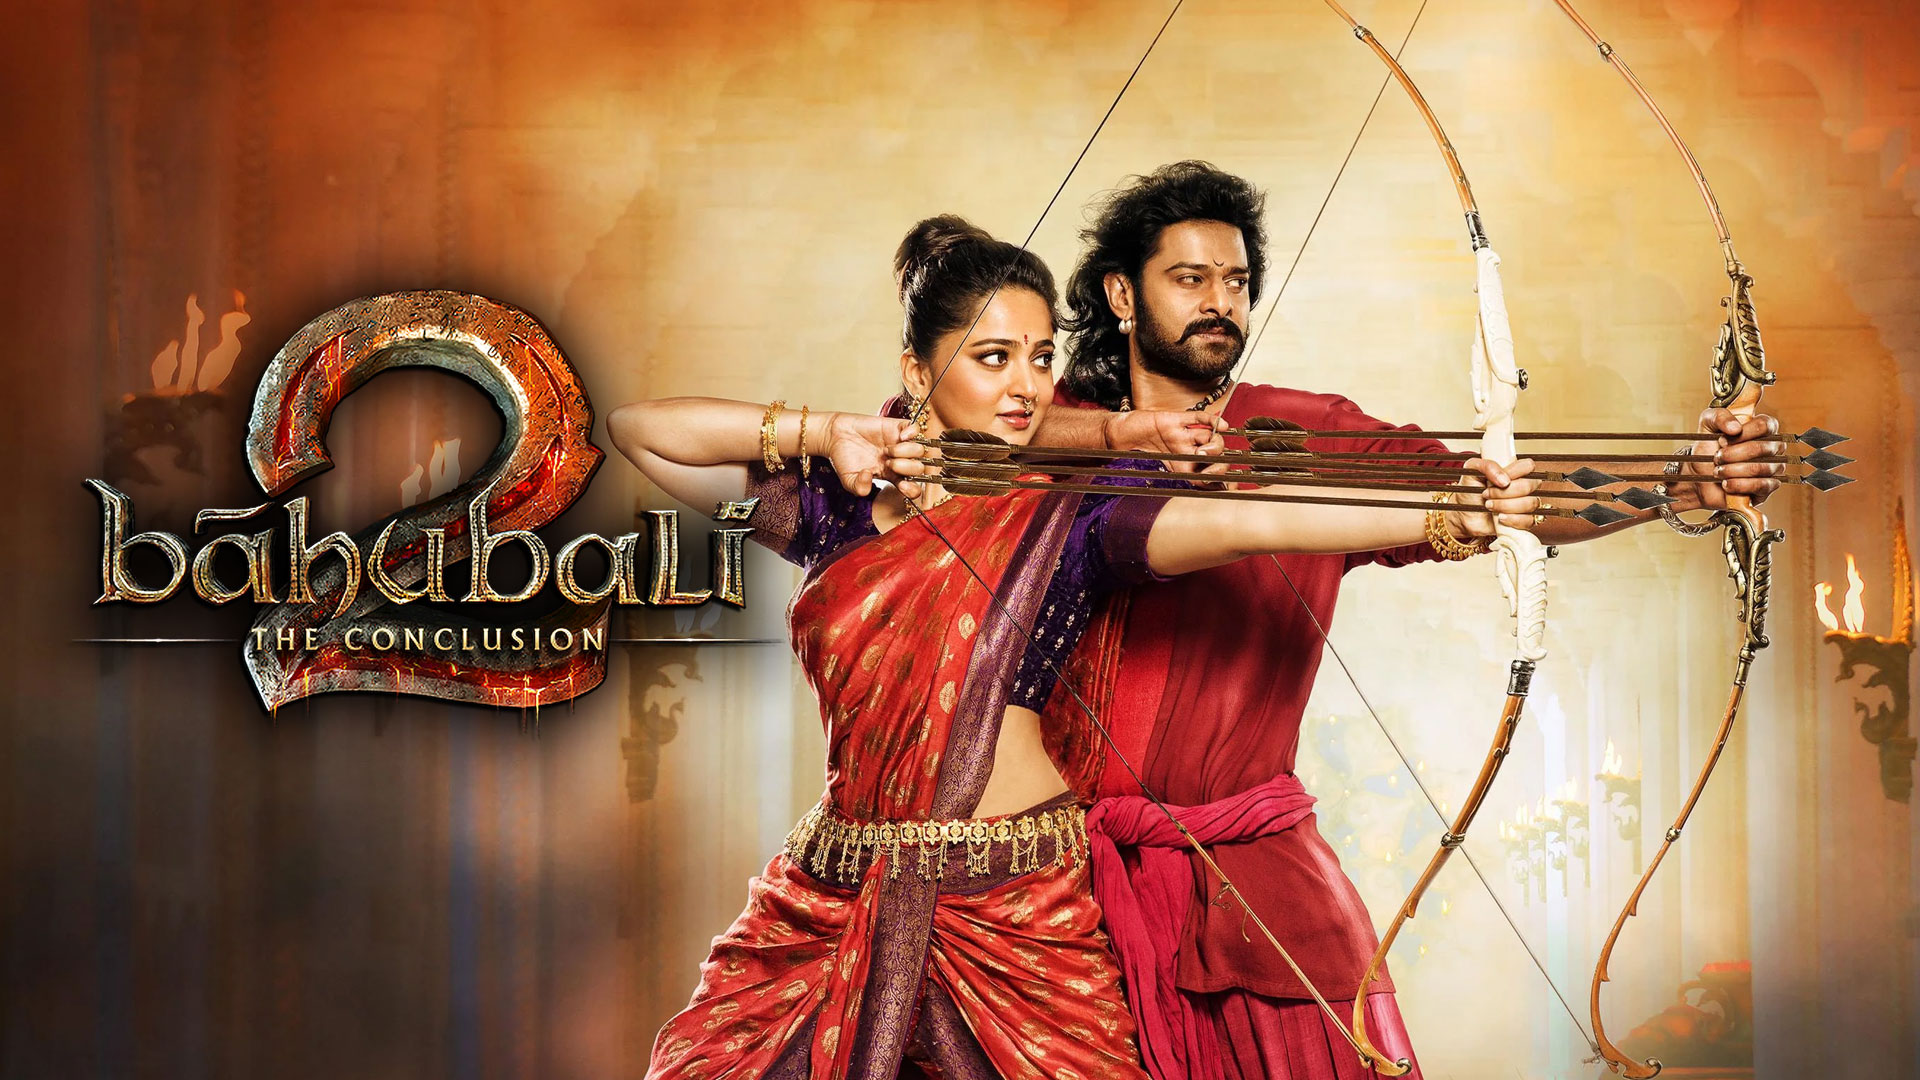 al newell recommends bahubali 2 movie download in hindi pic